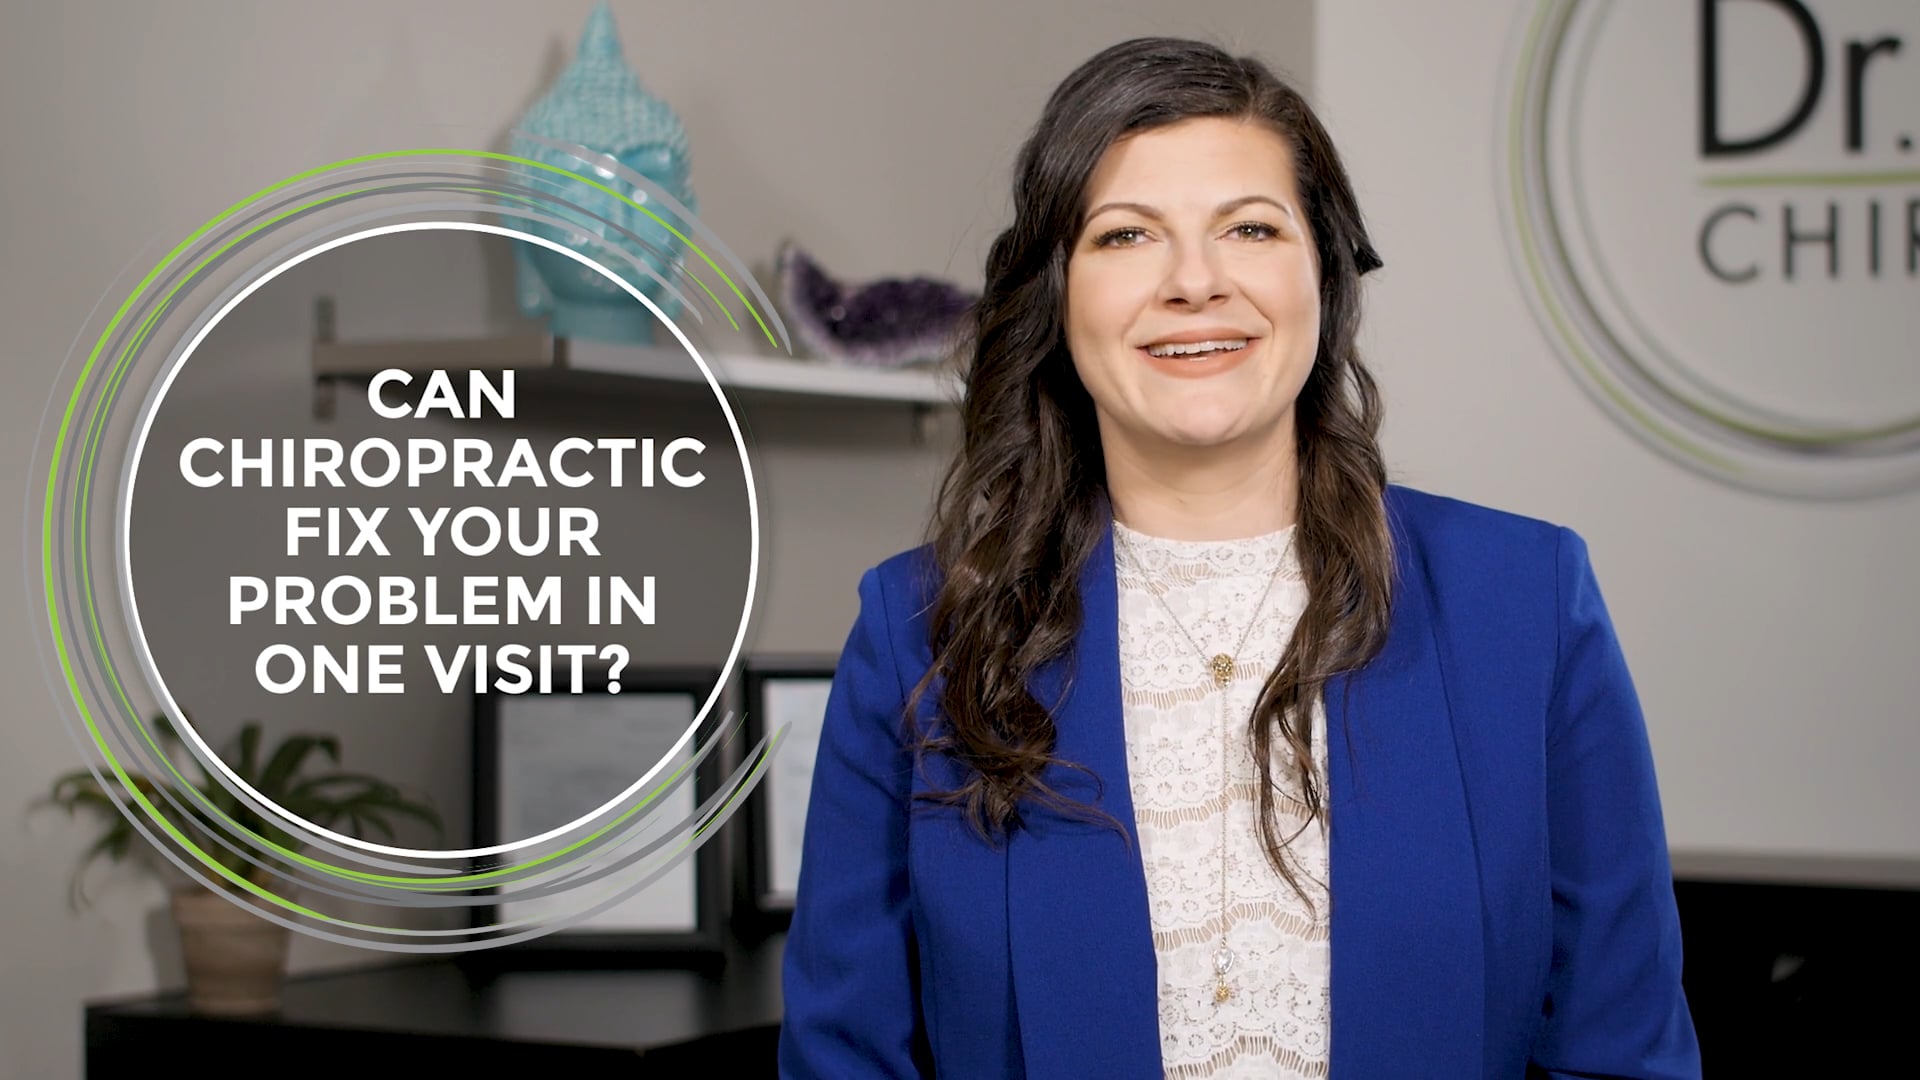 GENA BOFSHEVER - CAN CHIROPRACTIC FIX YOUR PROBLEM IN ONE VISIT?